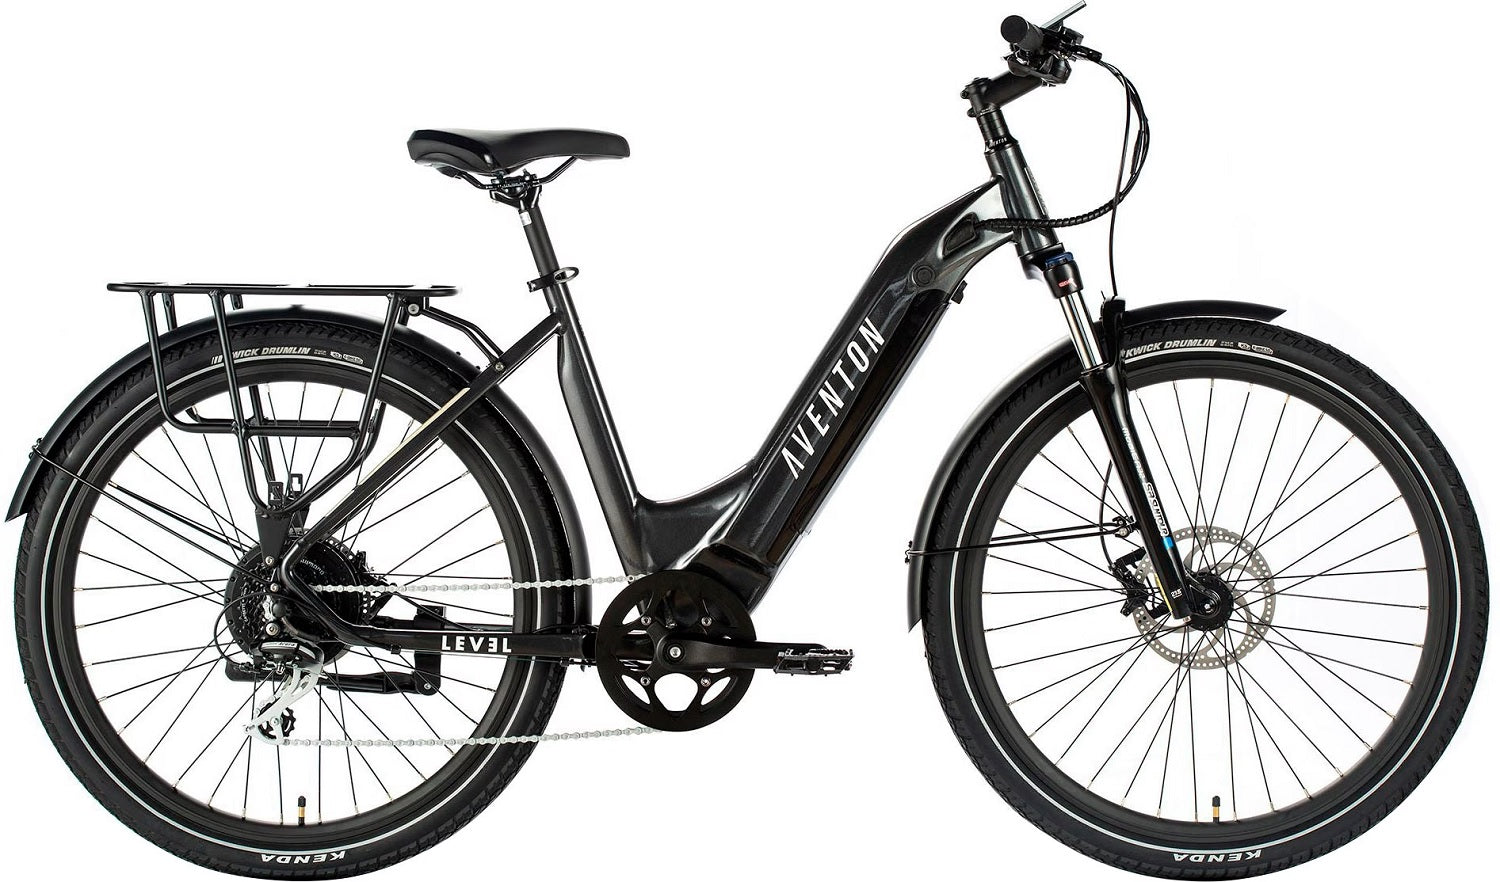 Aventon Level Commuter Step-Through Ebike with 40-mile Range - M/L - Earth Grey (Pre-Owned)